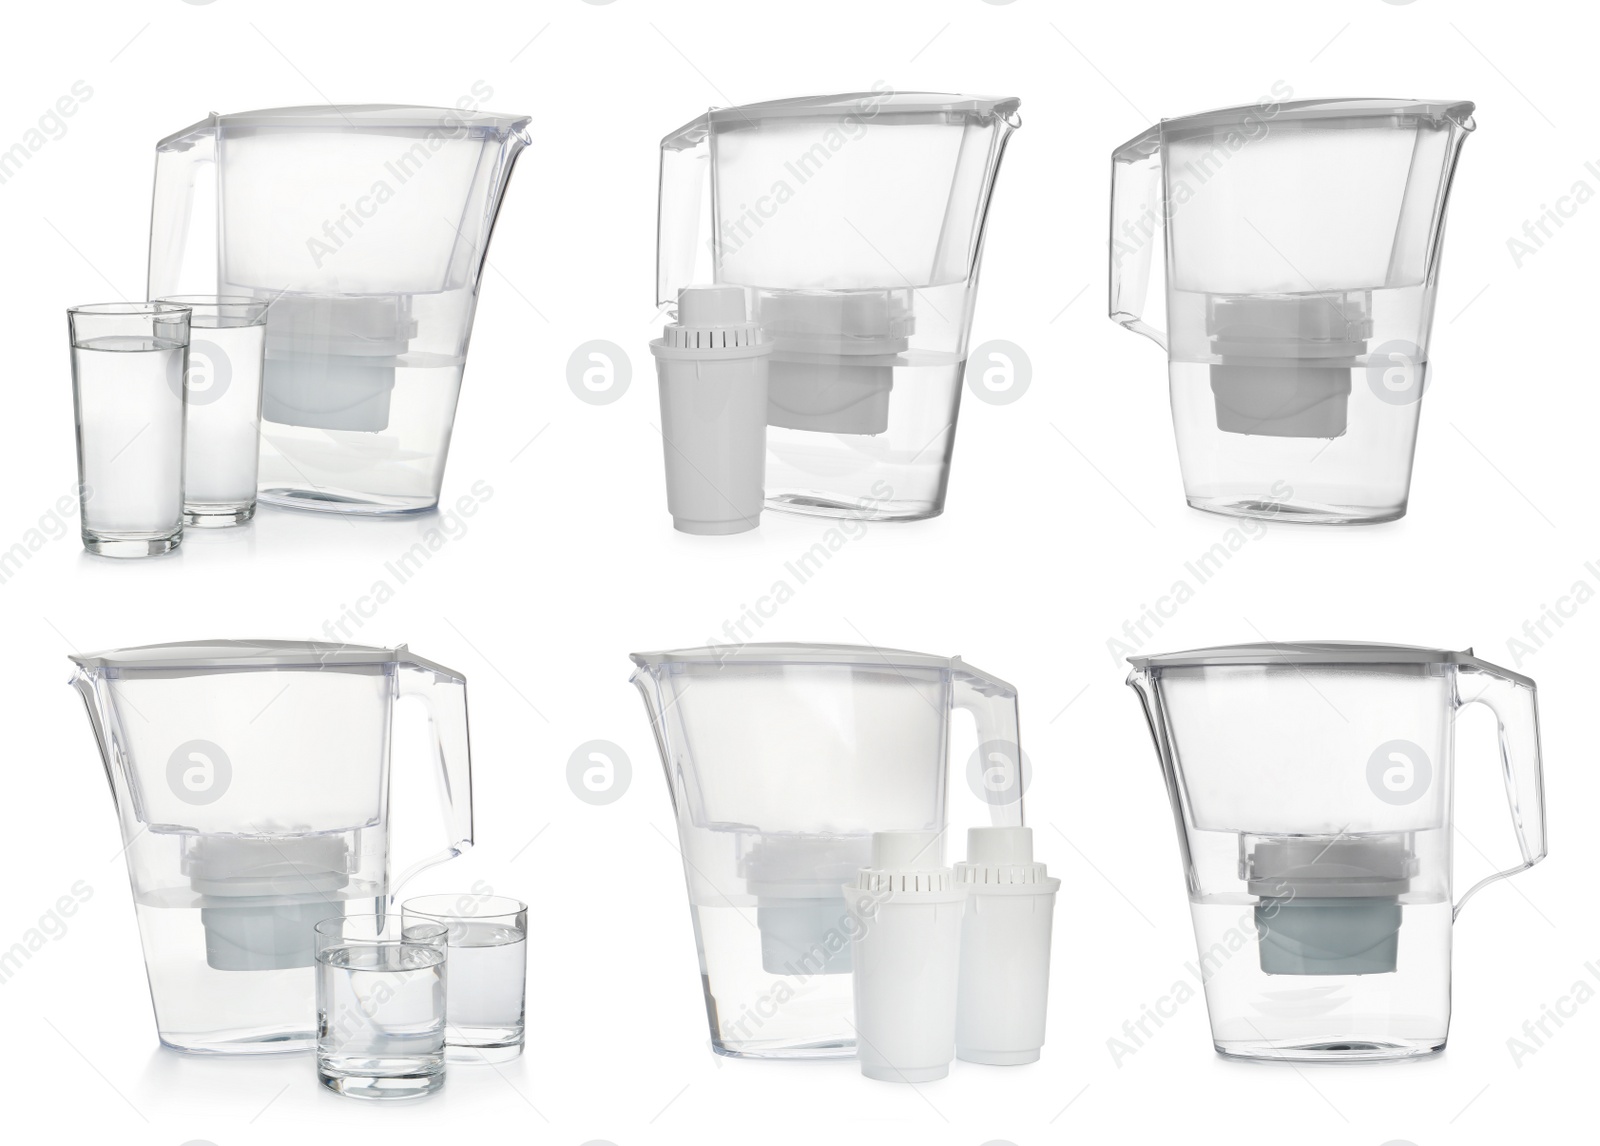 Image of Set with water filter jugs and glasses on white background